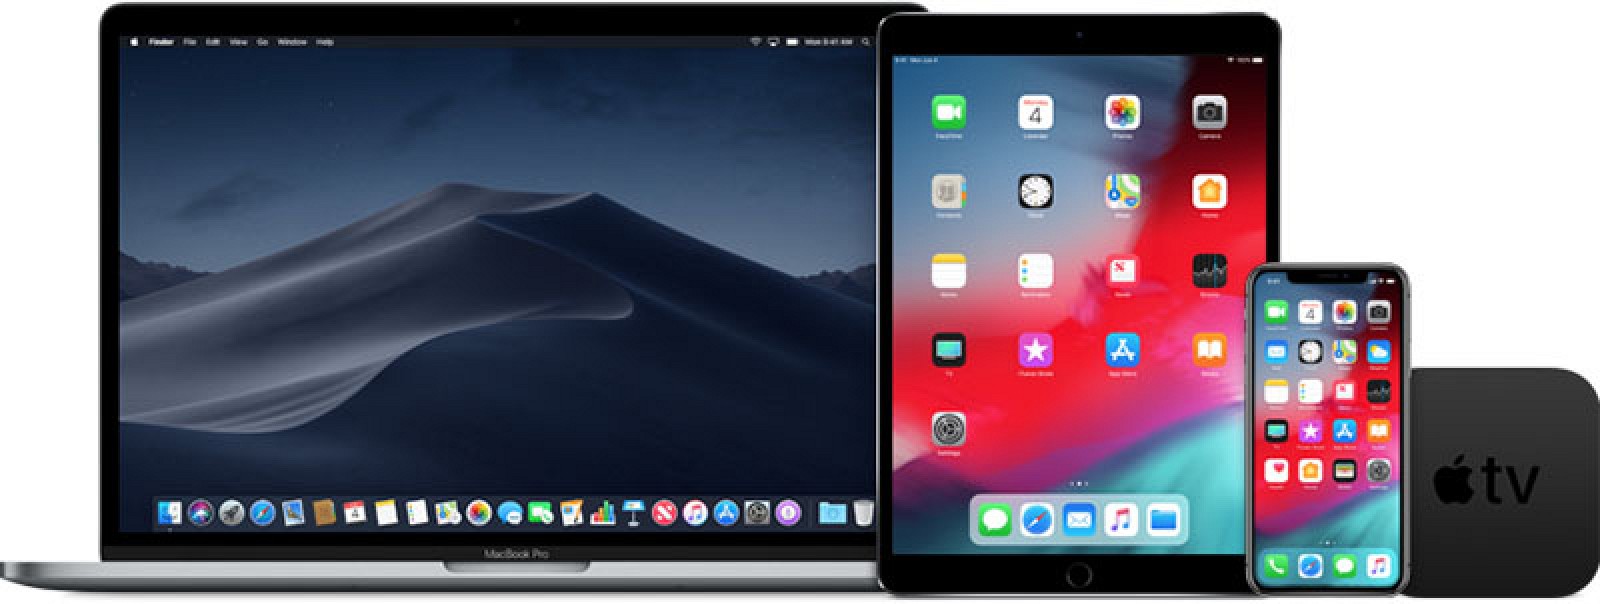 Apple Seeds iOS 12.1.1 Beta 2 to Developers and Public Beta Testers